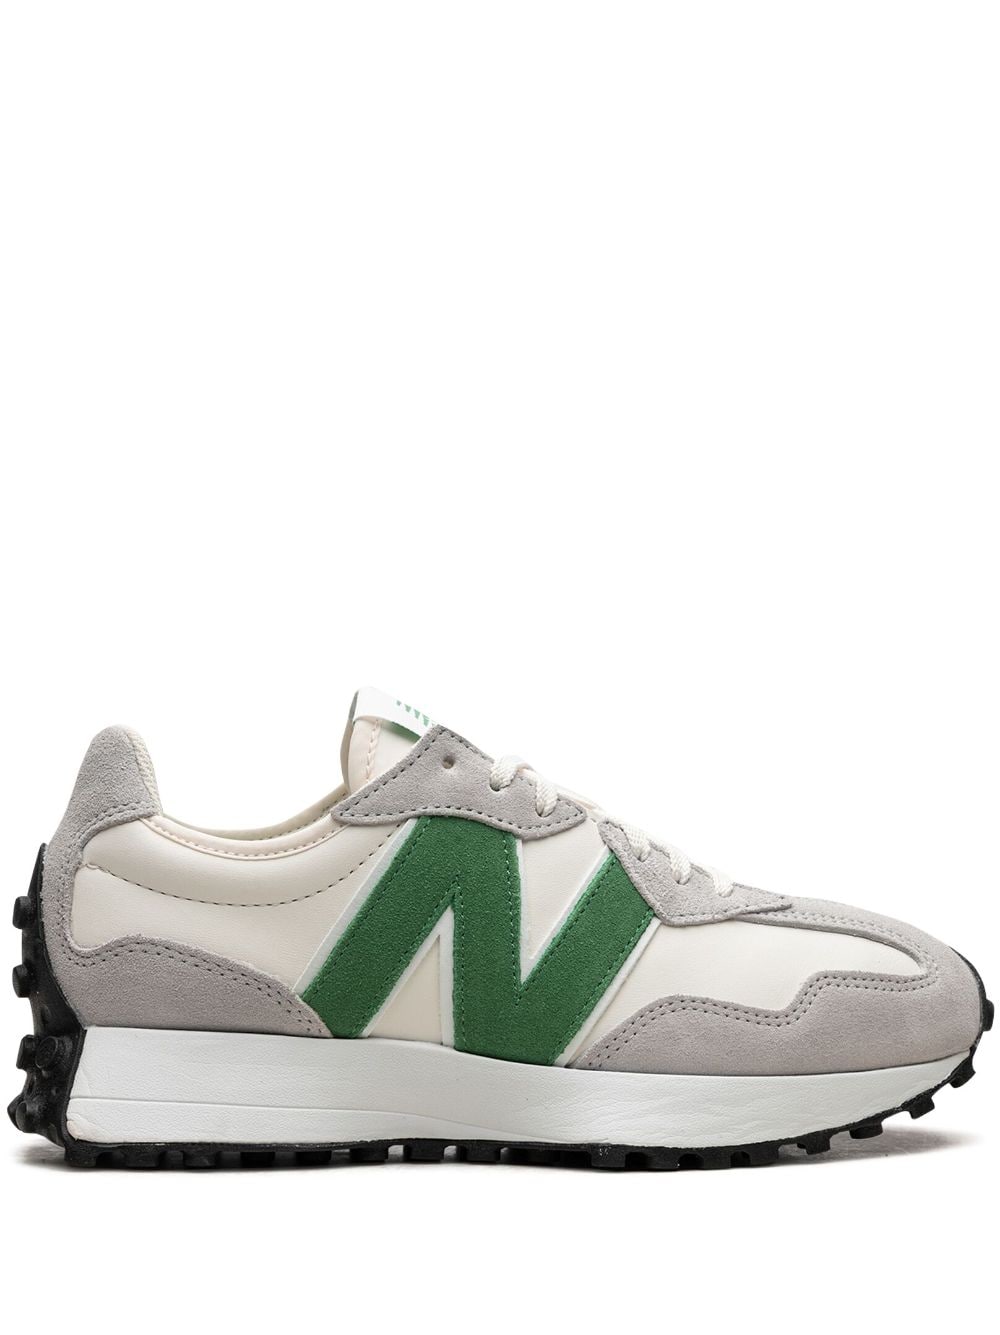 New Balance 327 "White/Green" sneakers